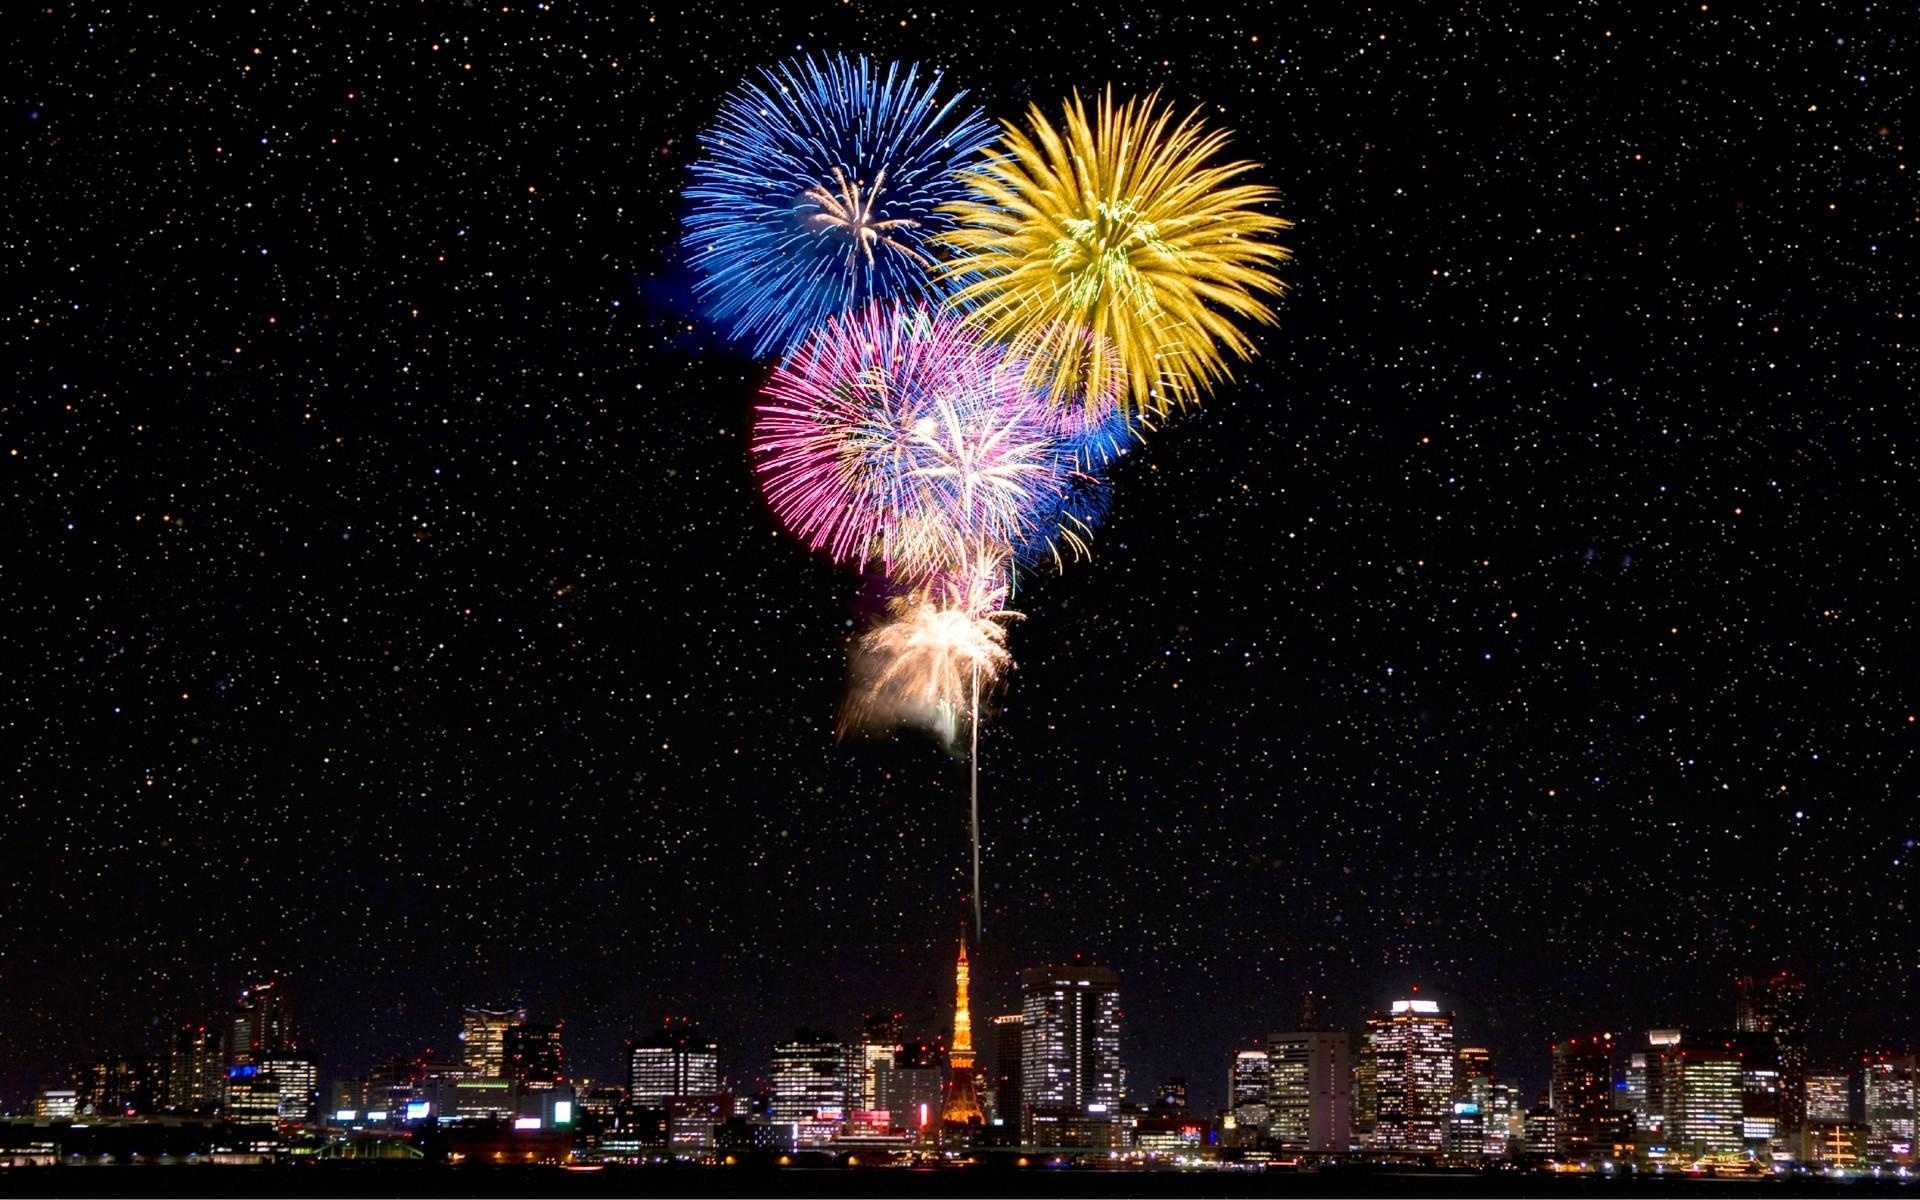 japanese, Fireworks, Cities, Architecture, Sky, Stars, Holidays, Festive Wallpaper